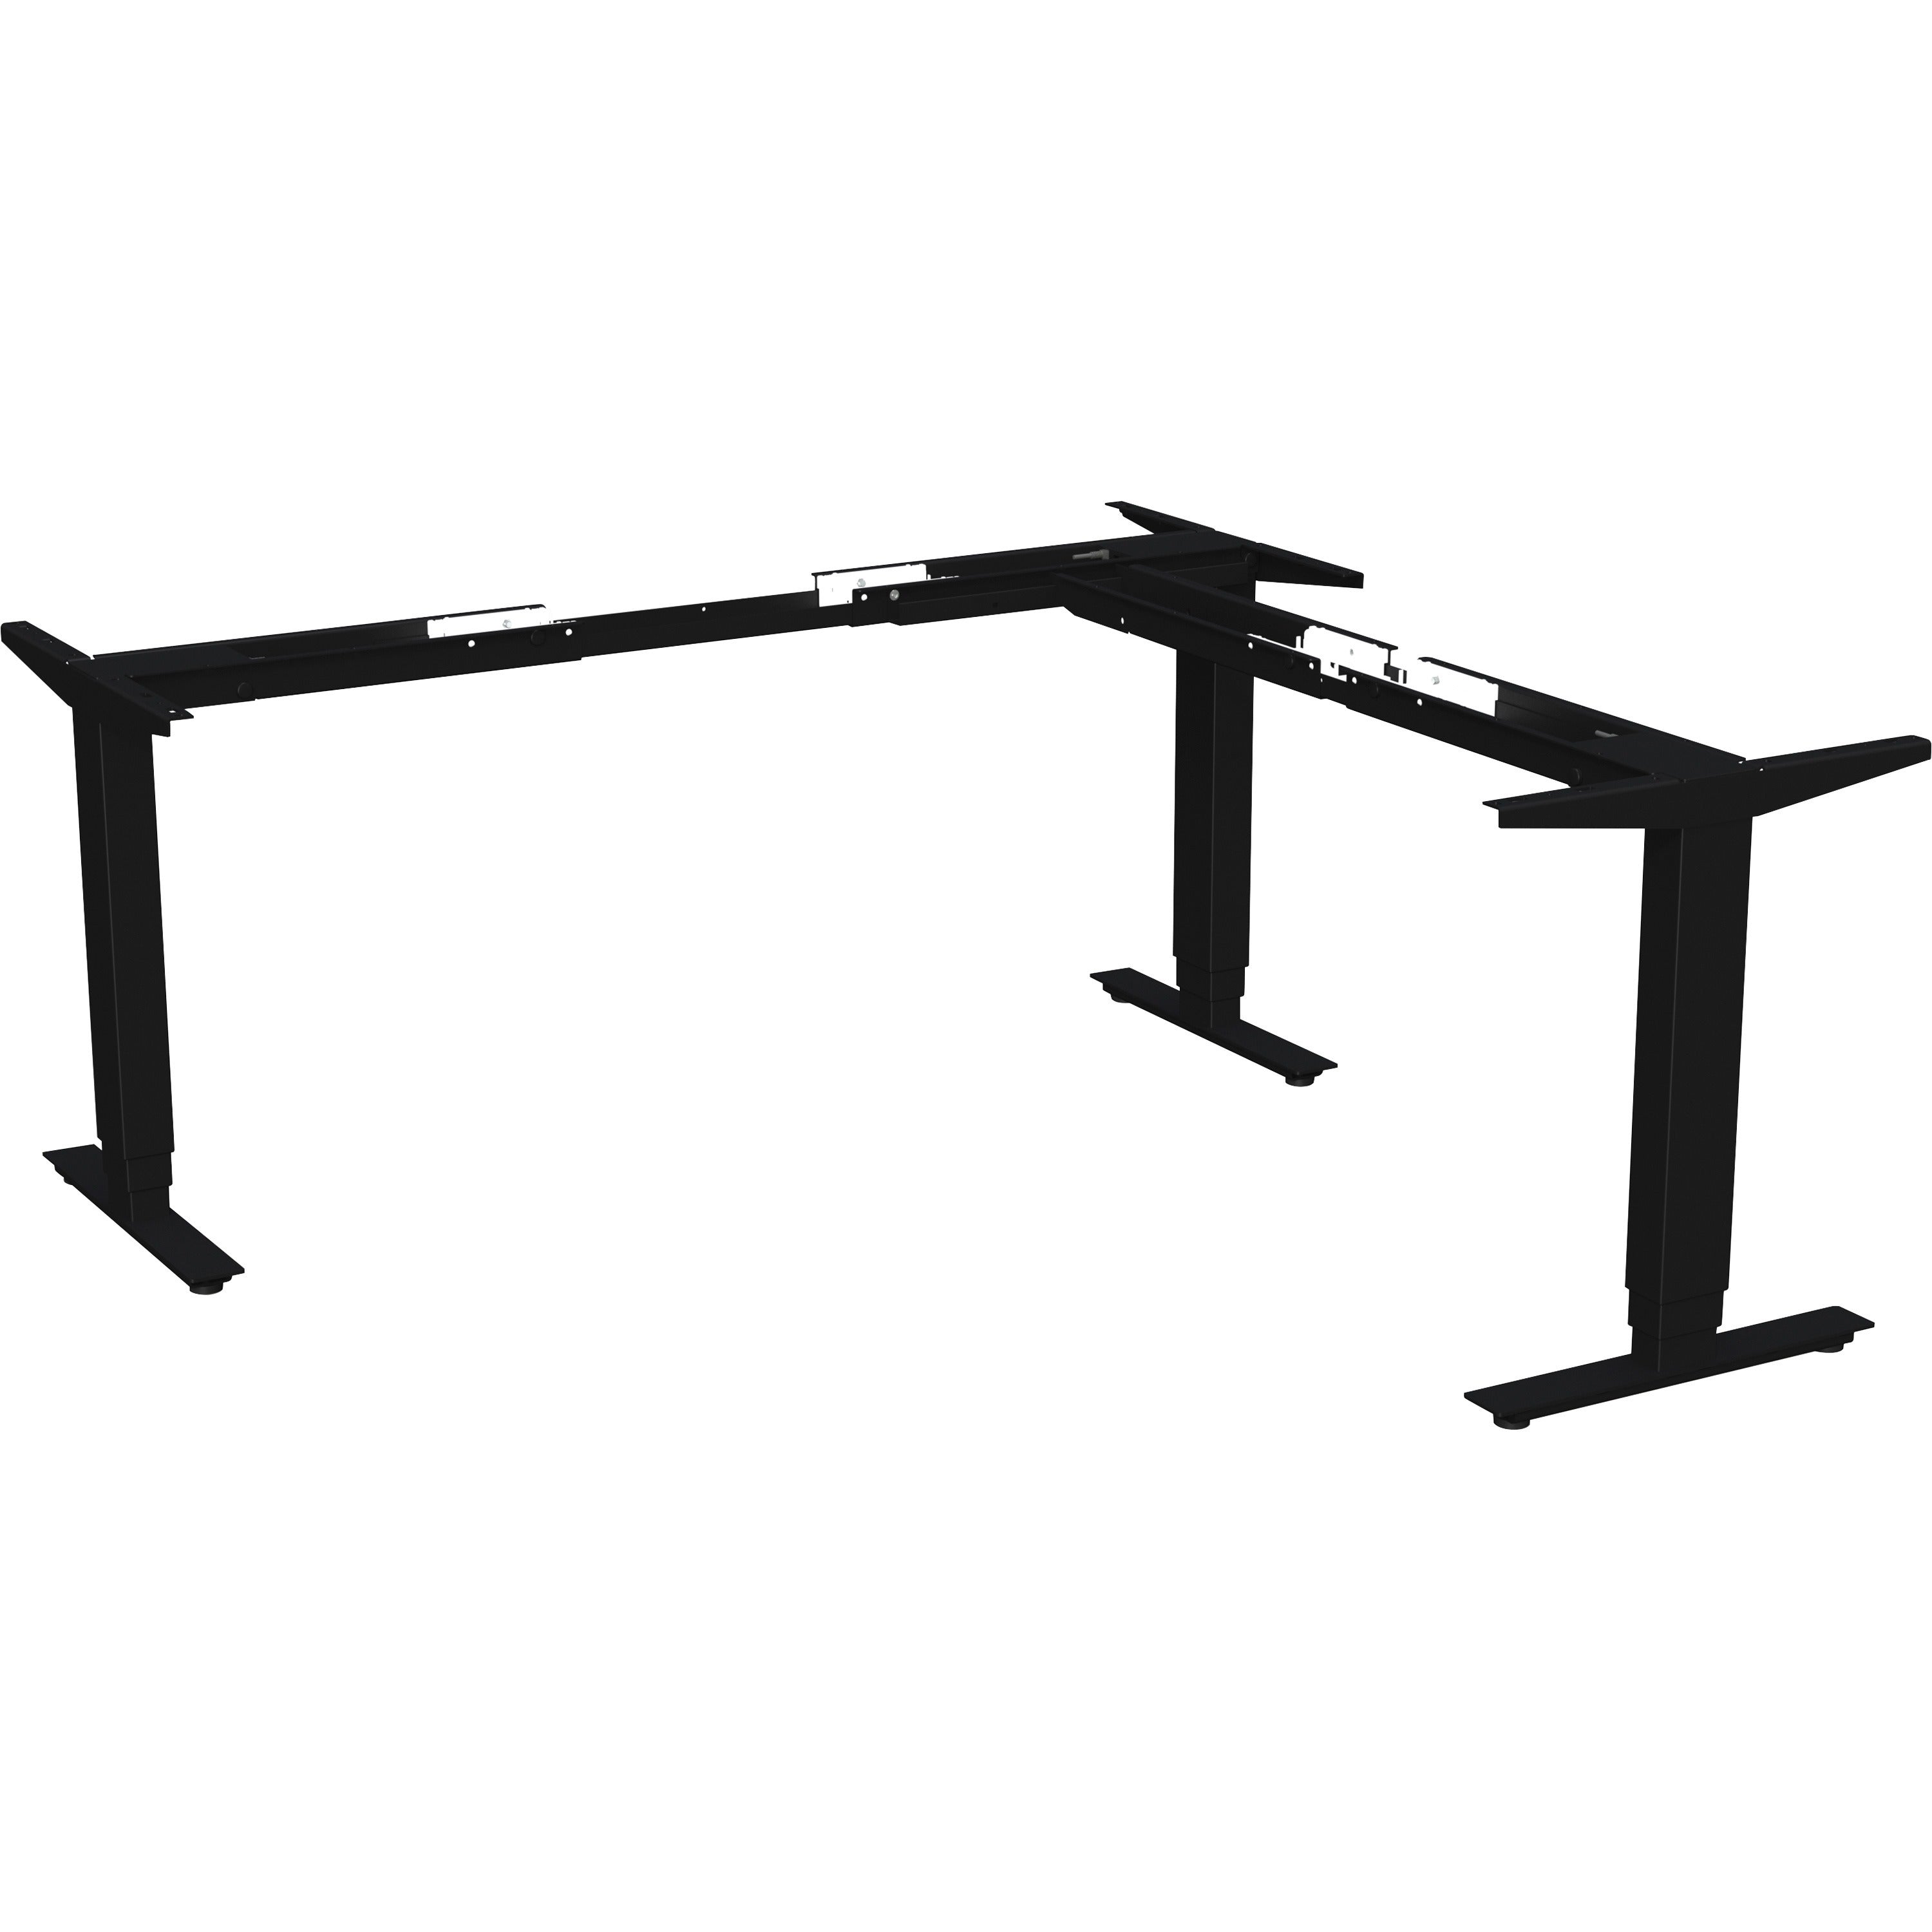 lorell-quadro-workstation-sit-to-stand-3-leg-base-black-three-leg-base-3-legs-24-to-50-adjustment-50-height-assembly-required-1-each_llr25946 - 1